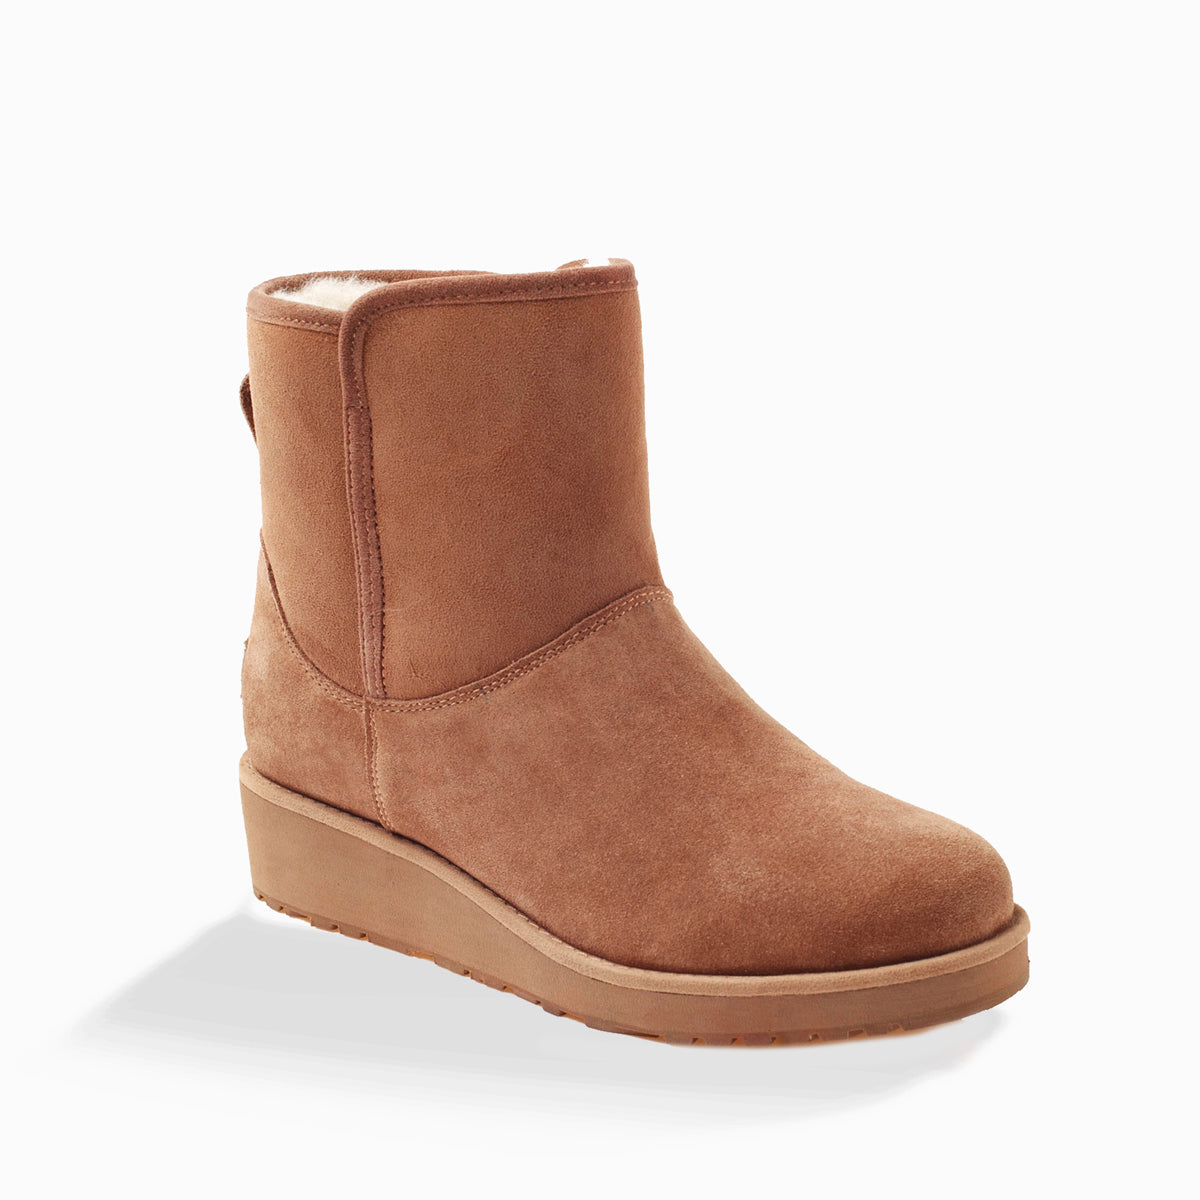 SIZE 36 - UGG MIA CLASSIC SHORT SLIM BOOTS (WATER RESISTANT)